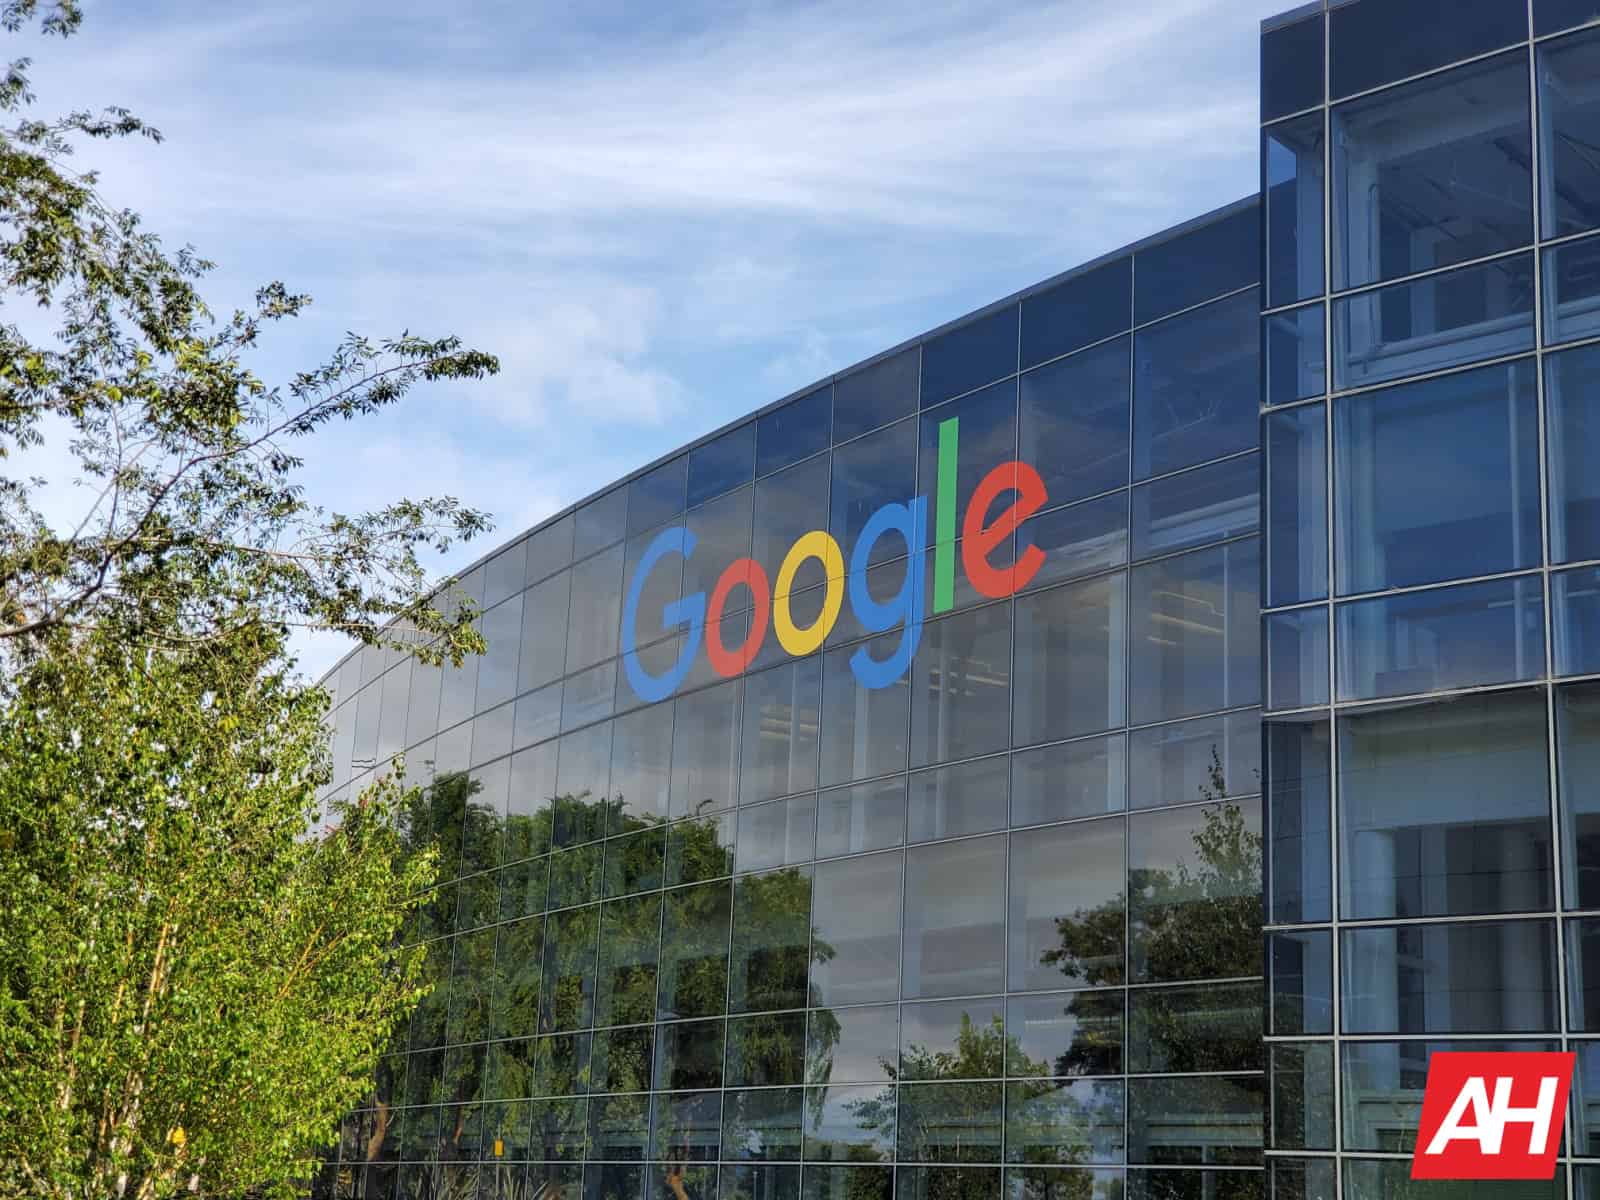 Google offshores 200 “Core” tech jobs after employee layoffs in the US